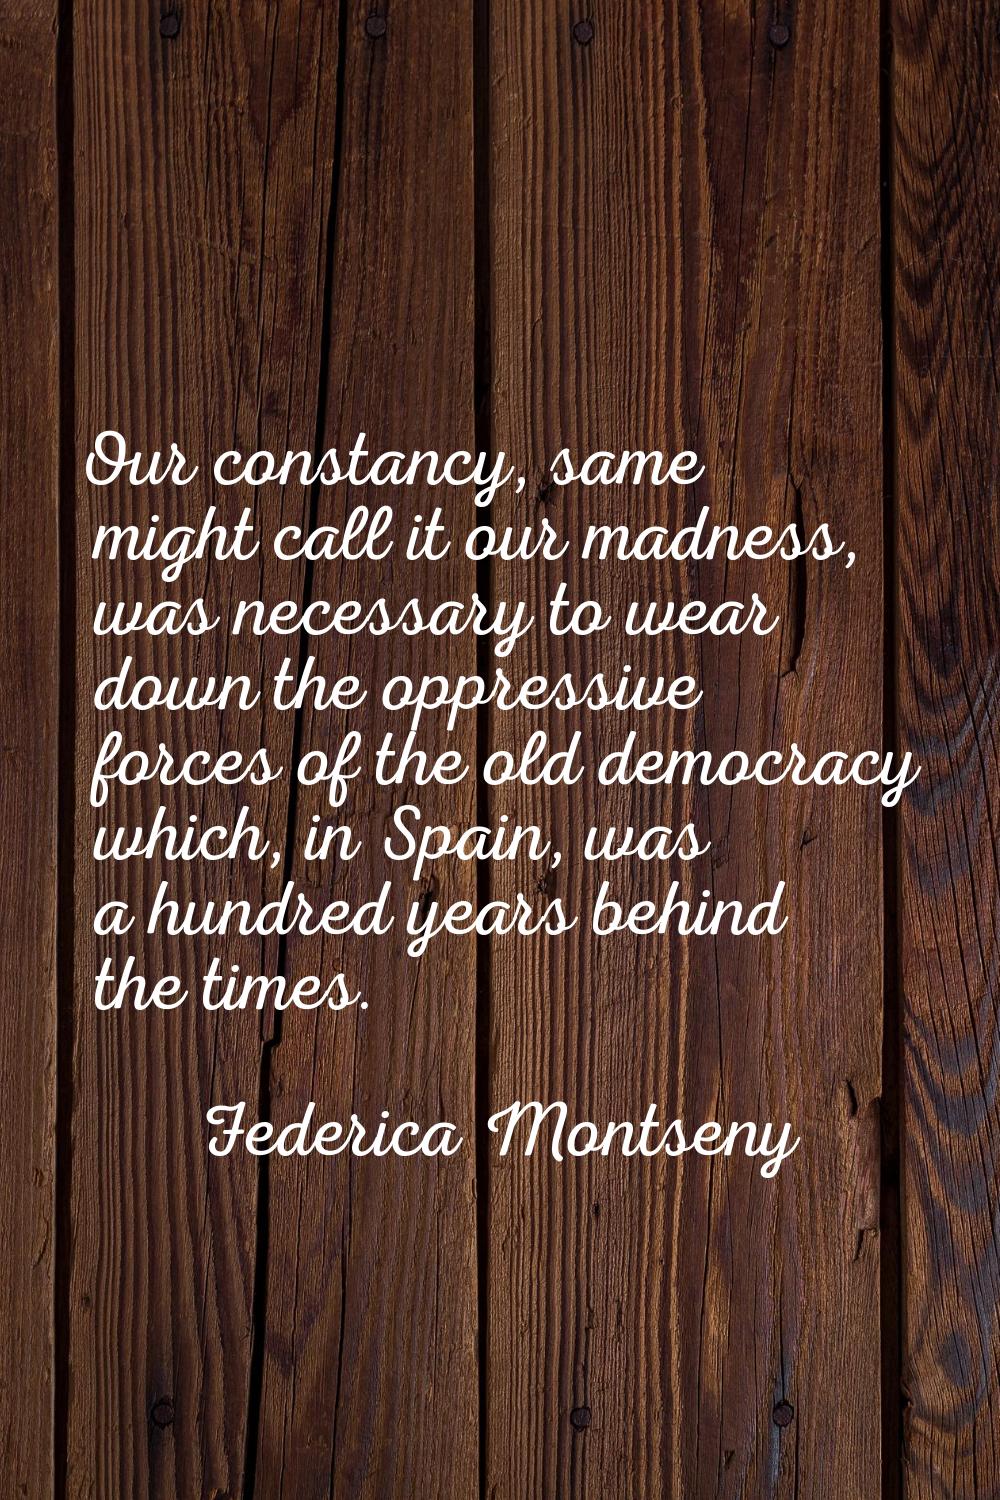 Our constancy, same might call it our madness, was necessary to wear down the oppressive forces of 